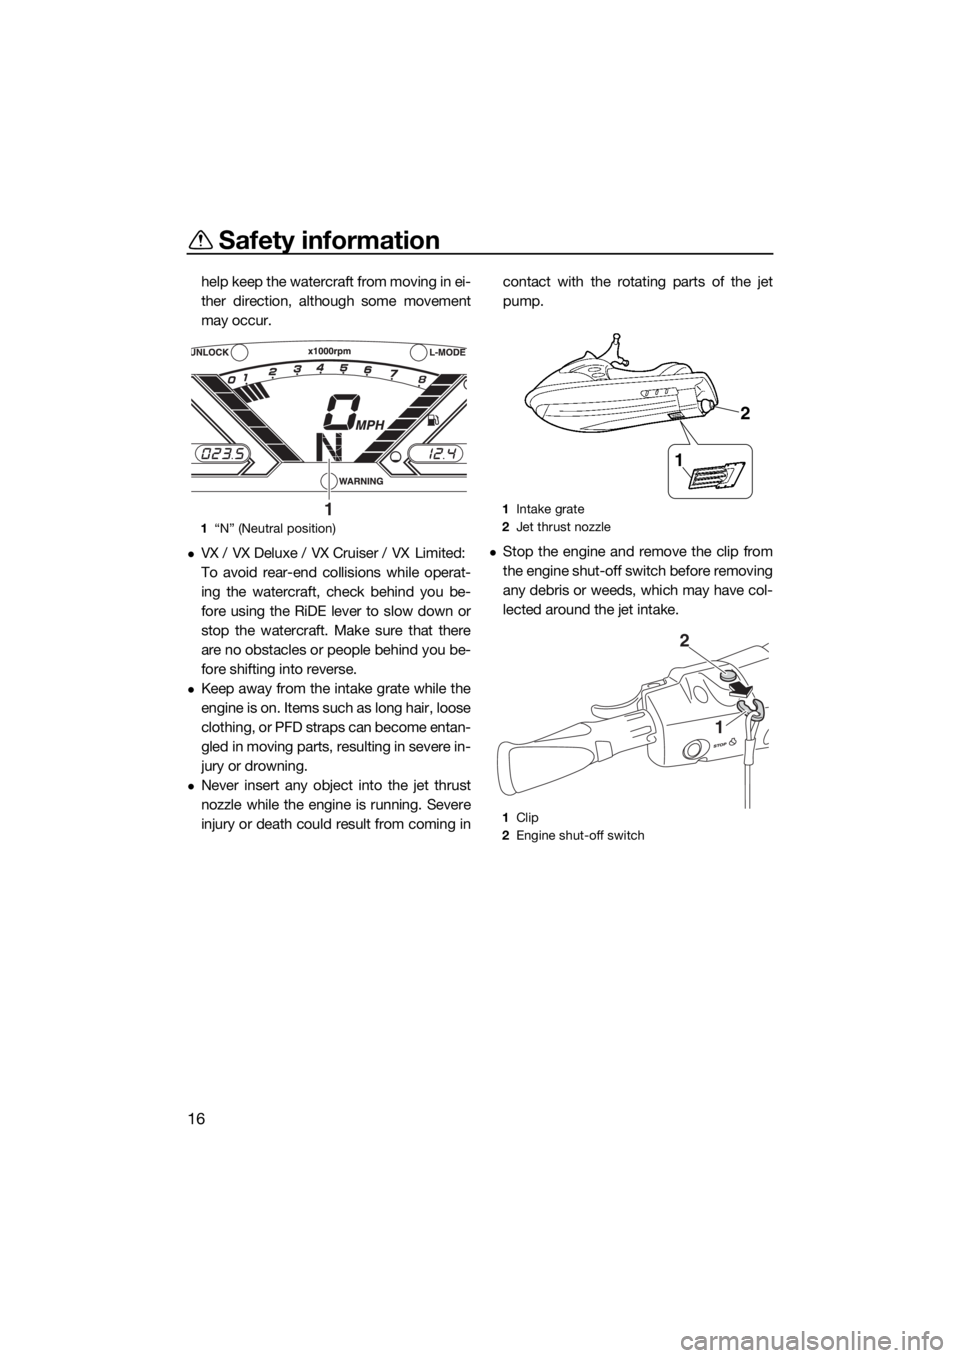 YAMAHA VX LIMITED 2019 Owners Manual Safety information
16
help keep the watercraft from moving in ei-
ther direction, although some movement
may occur.
VX / VX Deluxe / VX Cruiser / VX Limited: 
To avoid rear-end collisions while ope